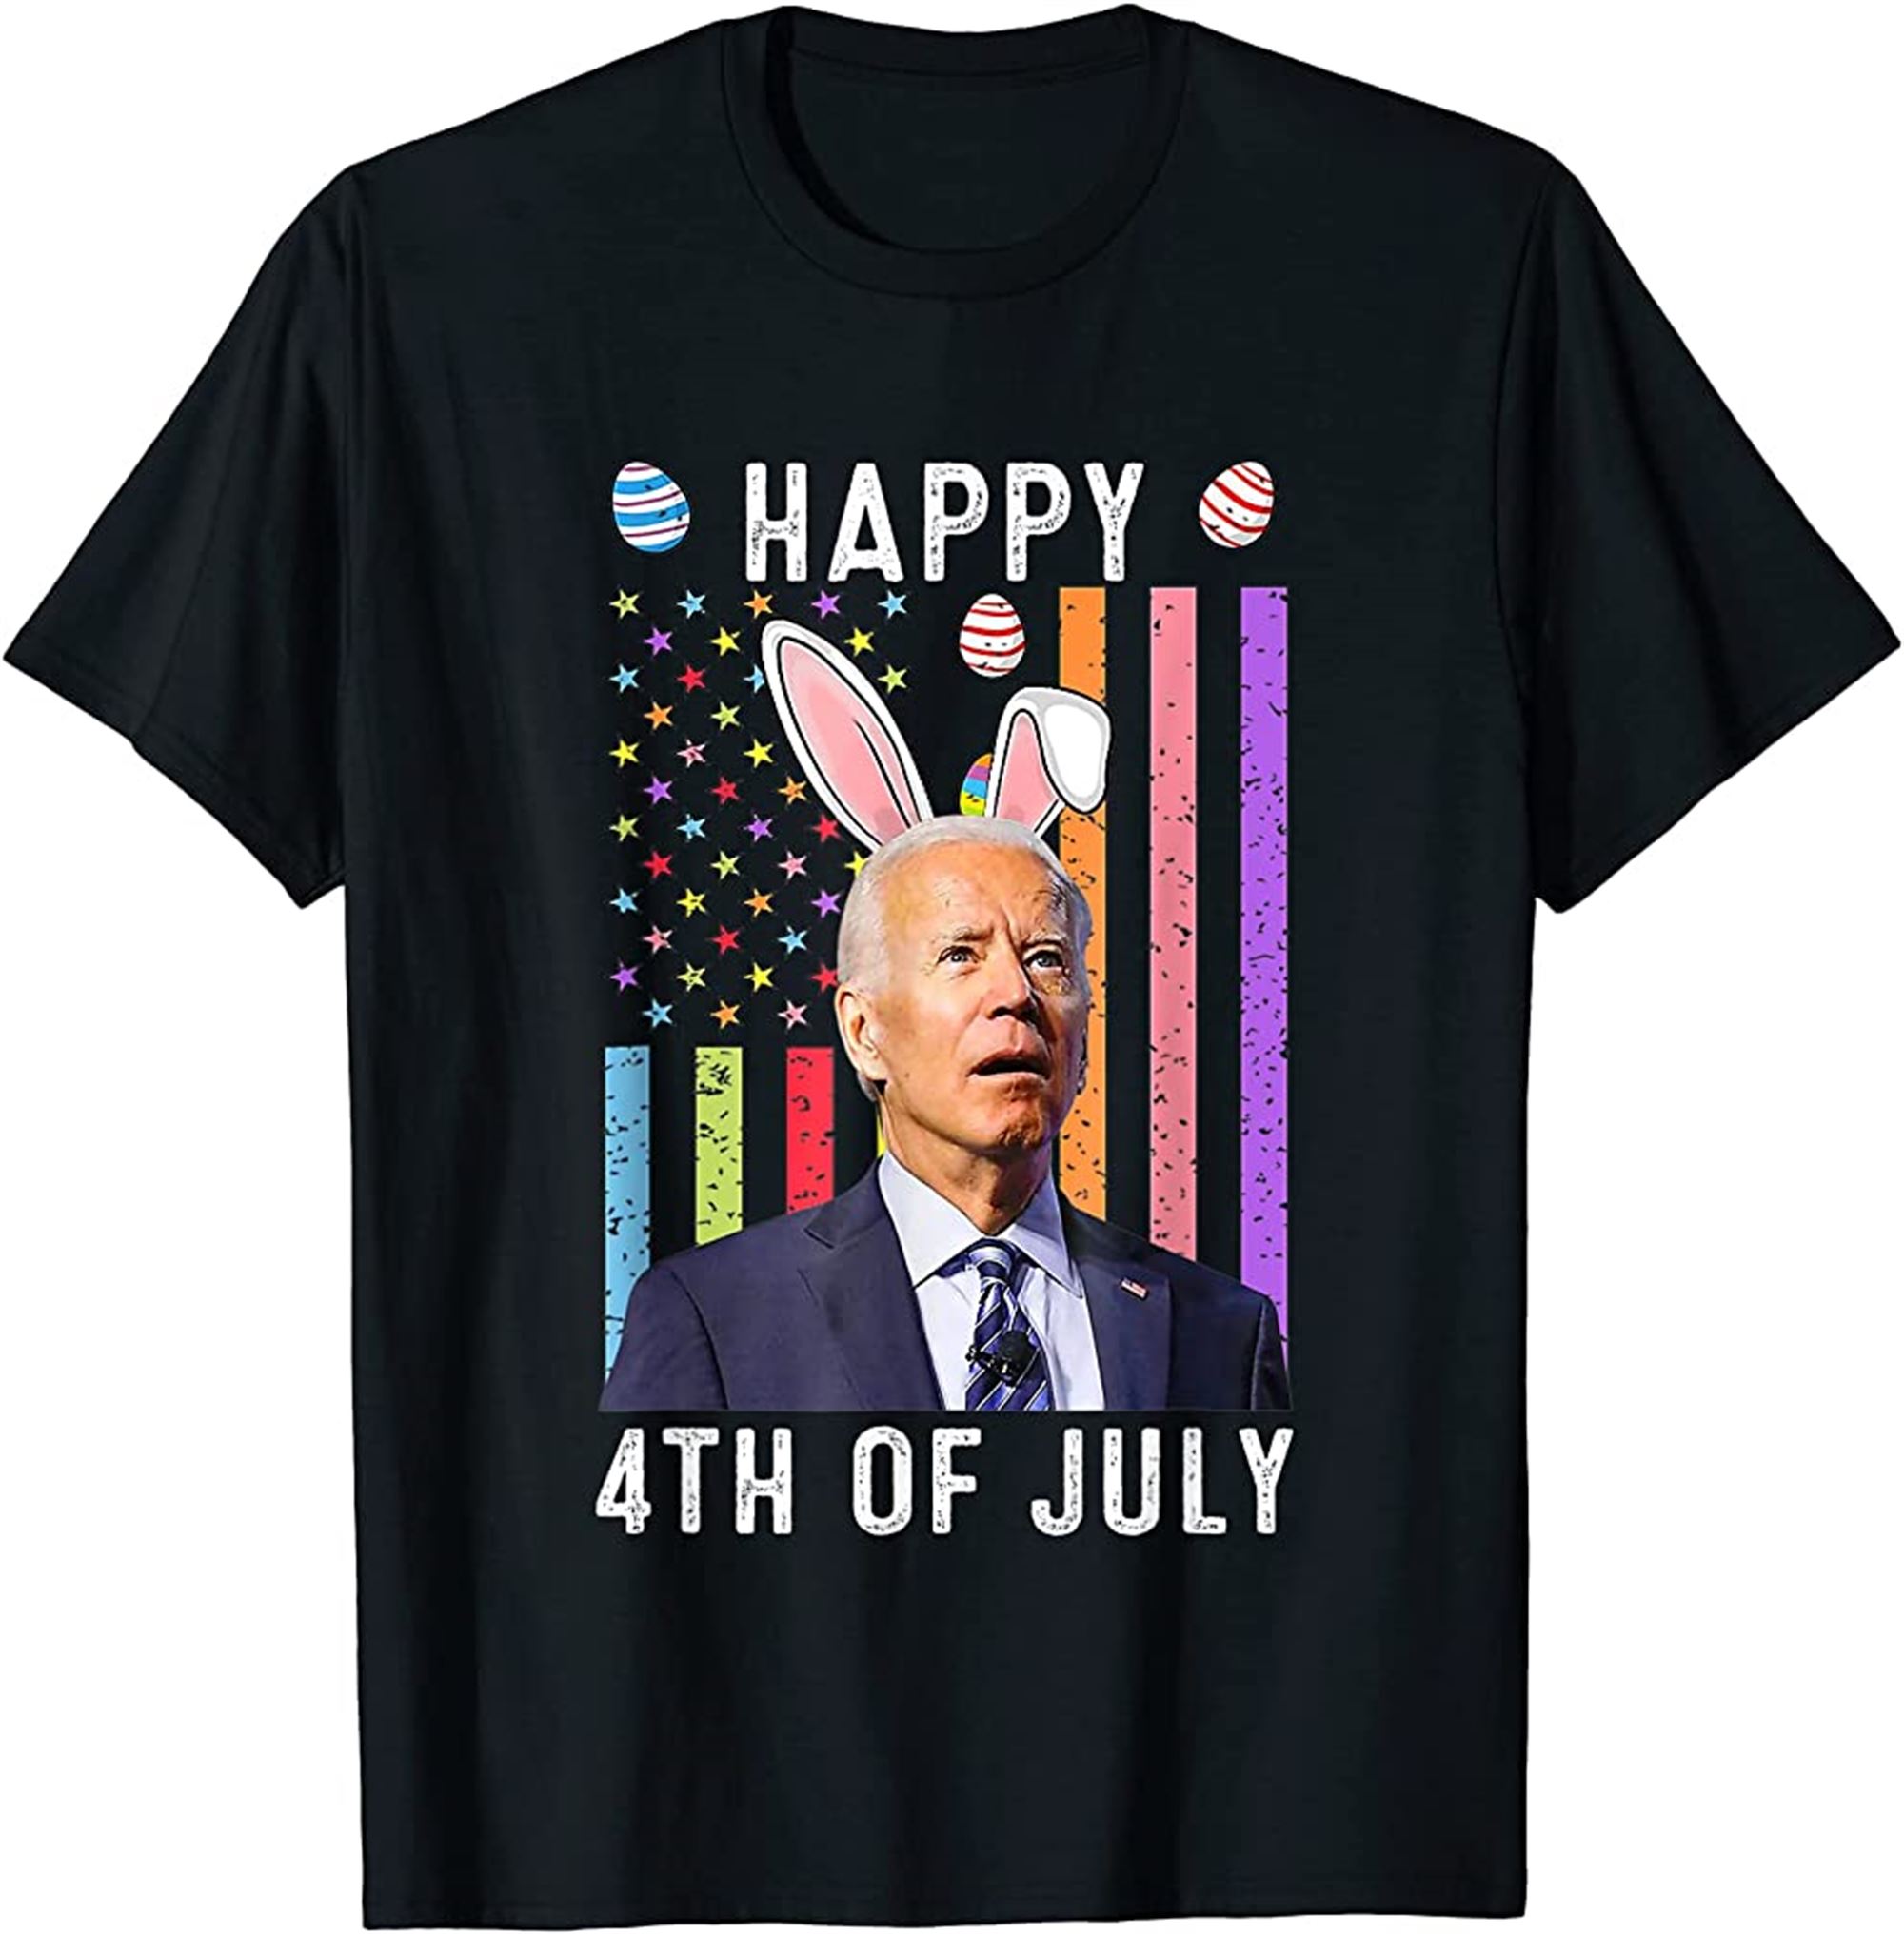 Happy 4th Of July Confused Funny Joe Biden Happy Easter Day T-shirt Size Up To 5xl